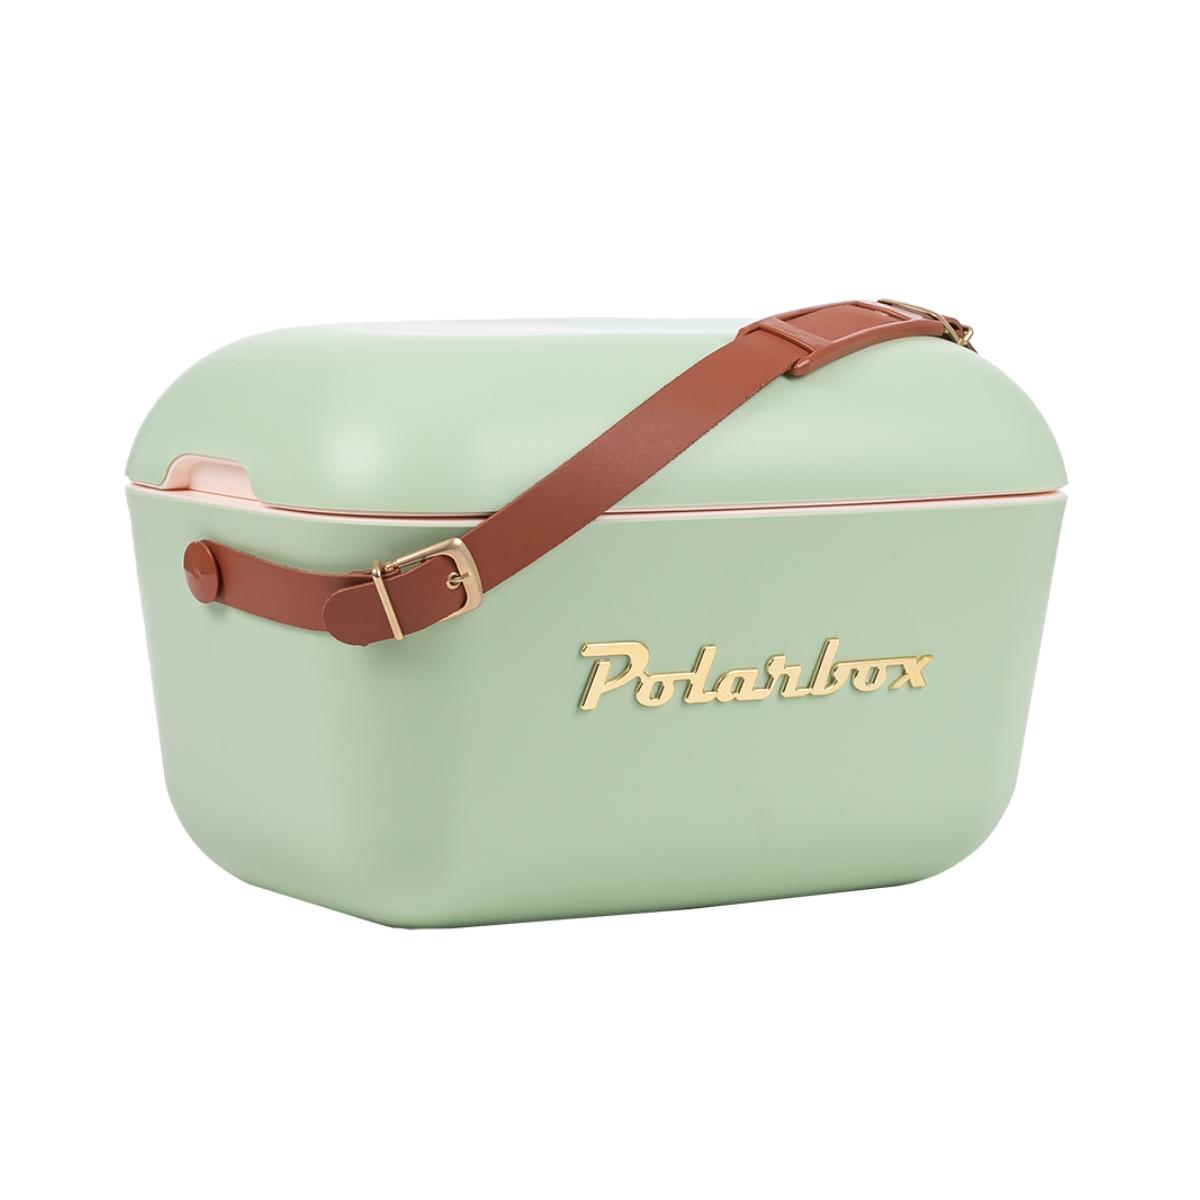 Polarbox 12 Liters Classic Cooler Box Olive - Green Olive Green PP PS